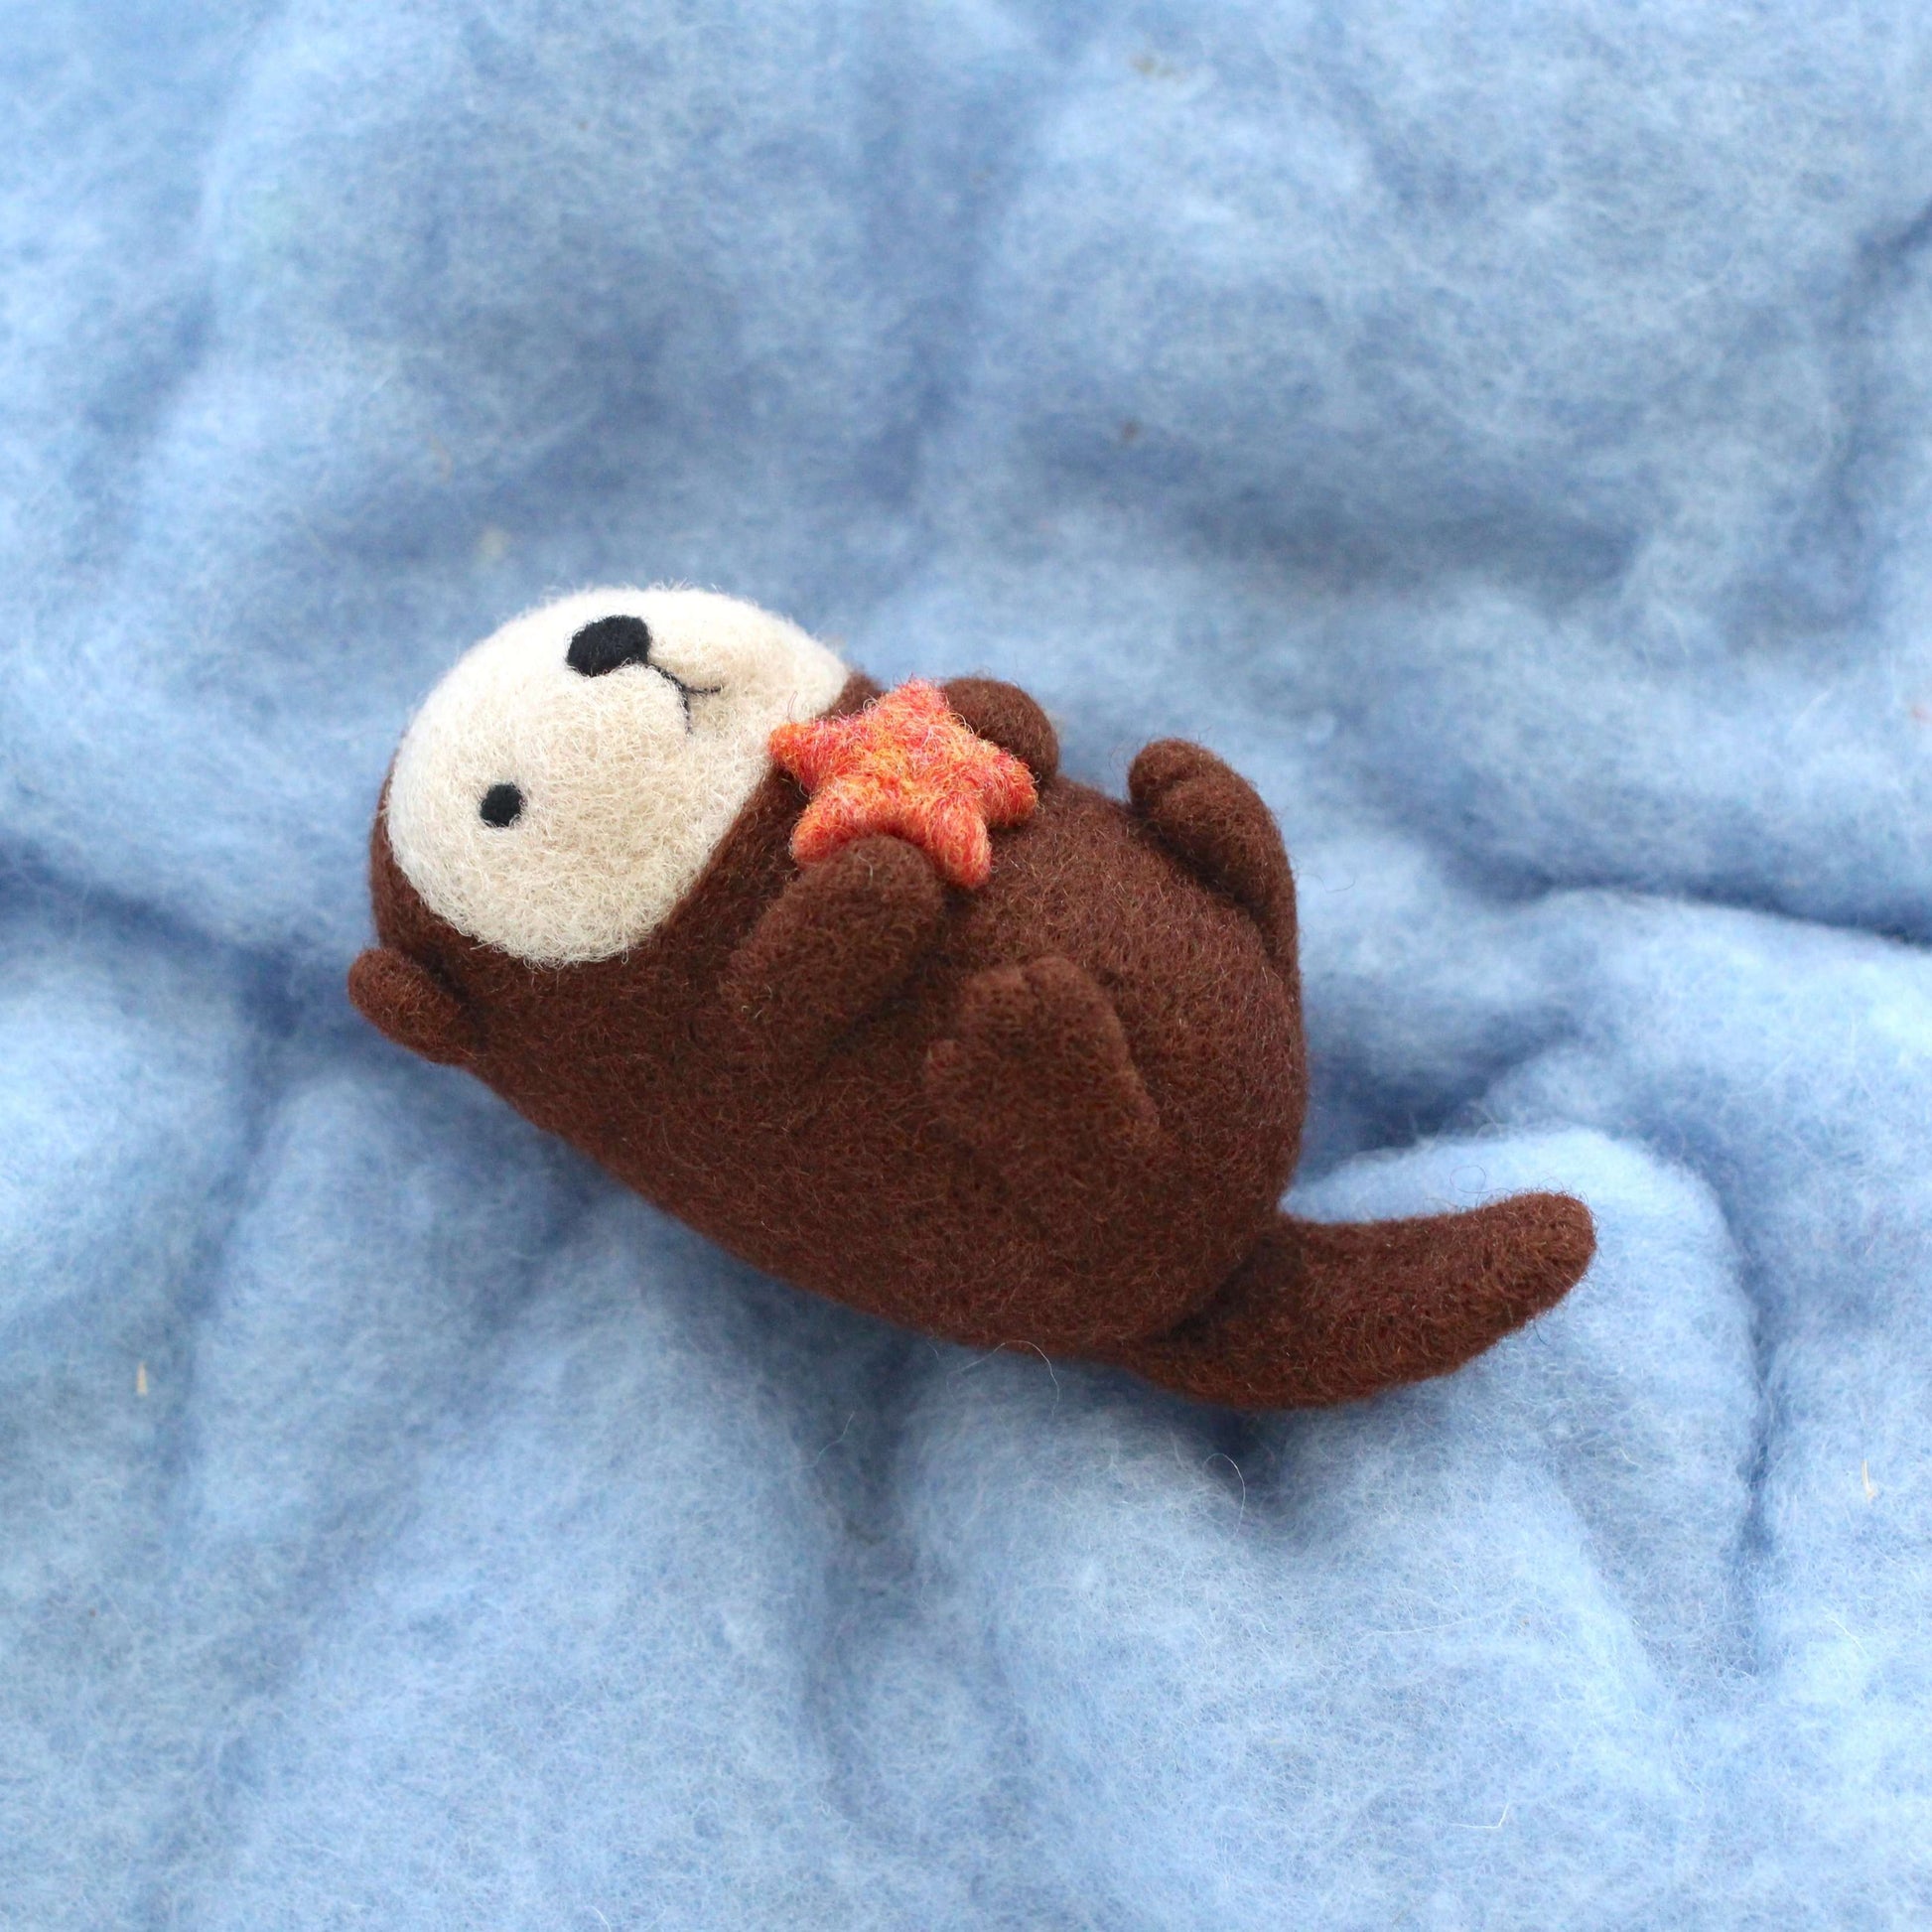 Needle Felted Sea Otter holding Starfish by Wild Whimsy Woolies